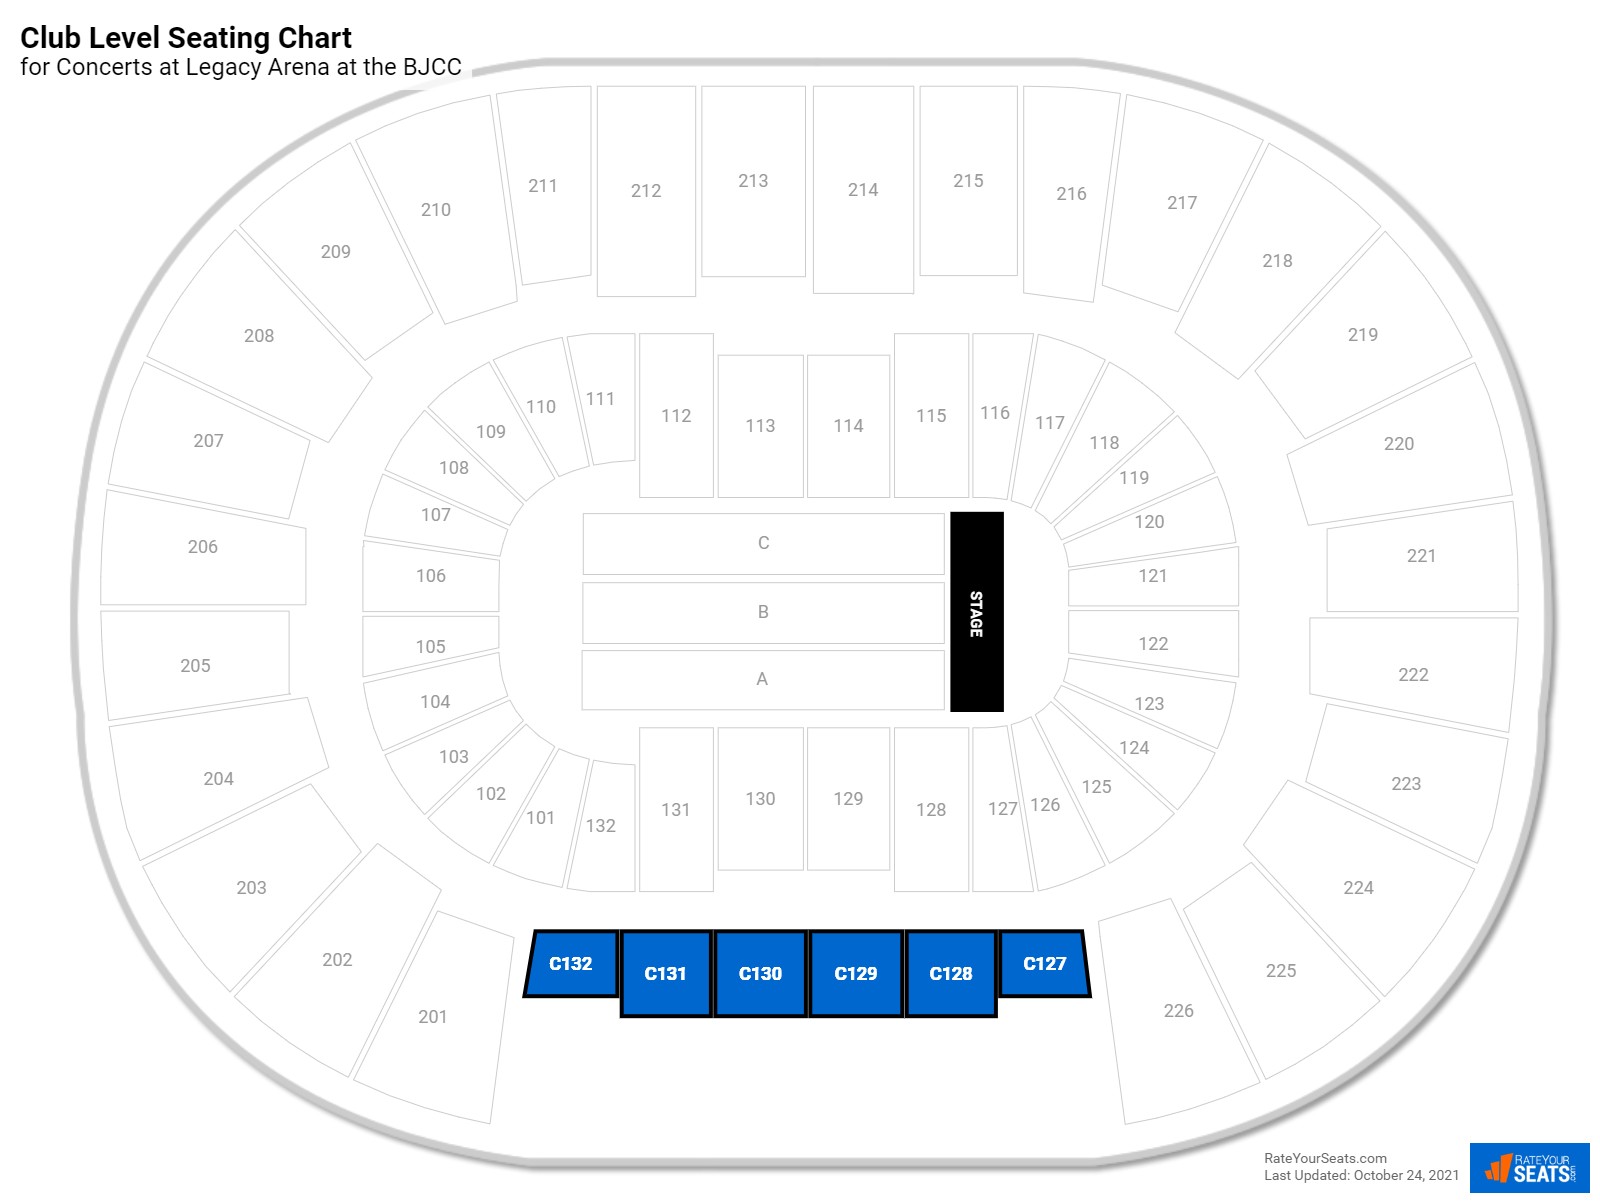 Concert Club Level Seating Chart at Legacy Arena at the BJCC